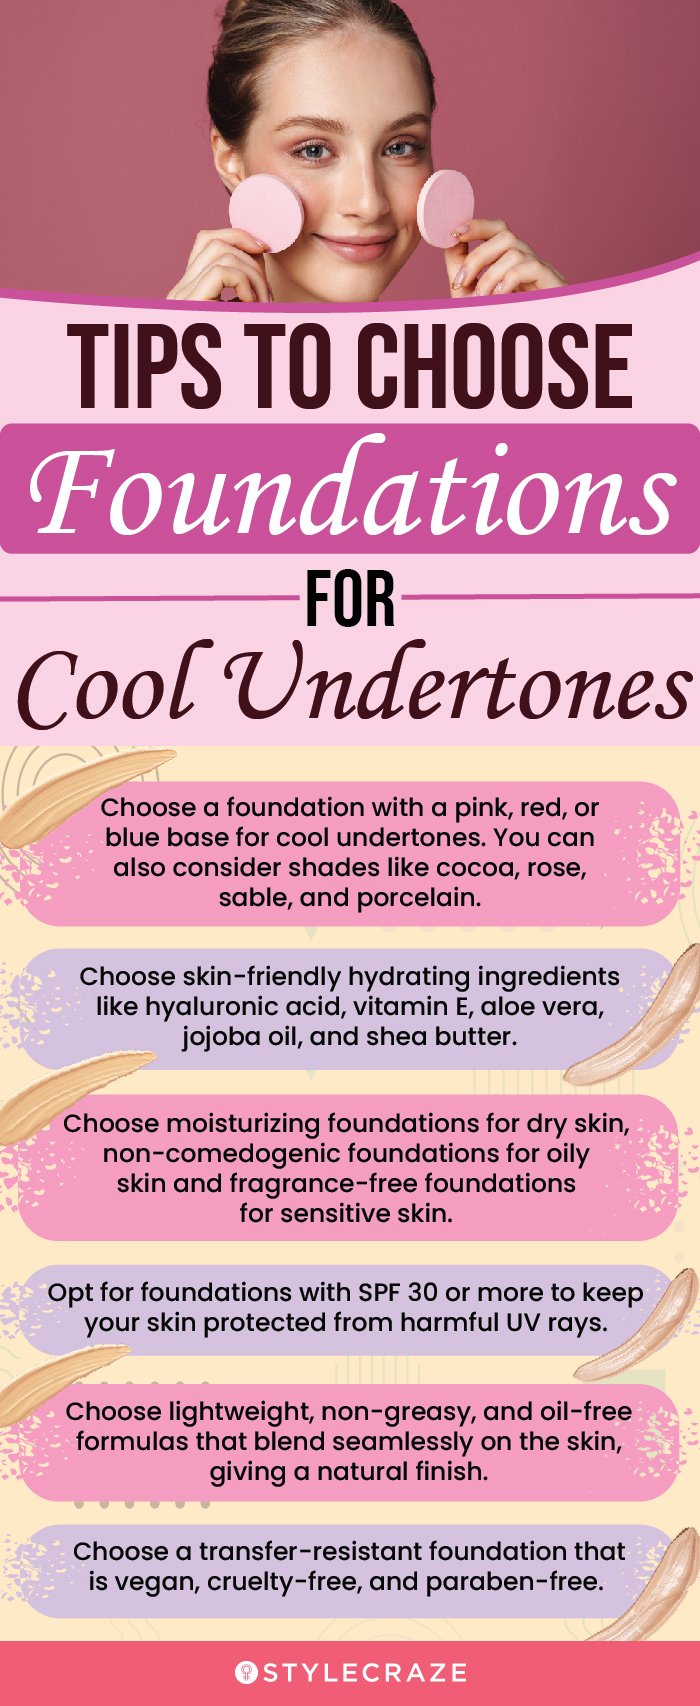 Tips To Choose Foundations For Cool Undertones